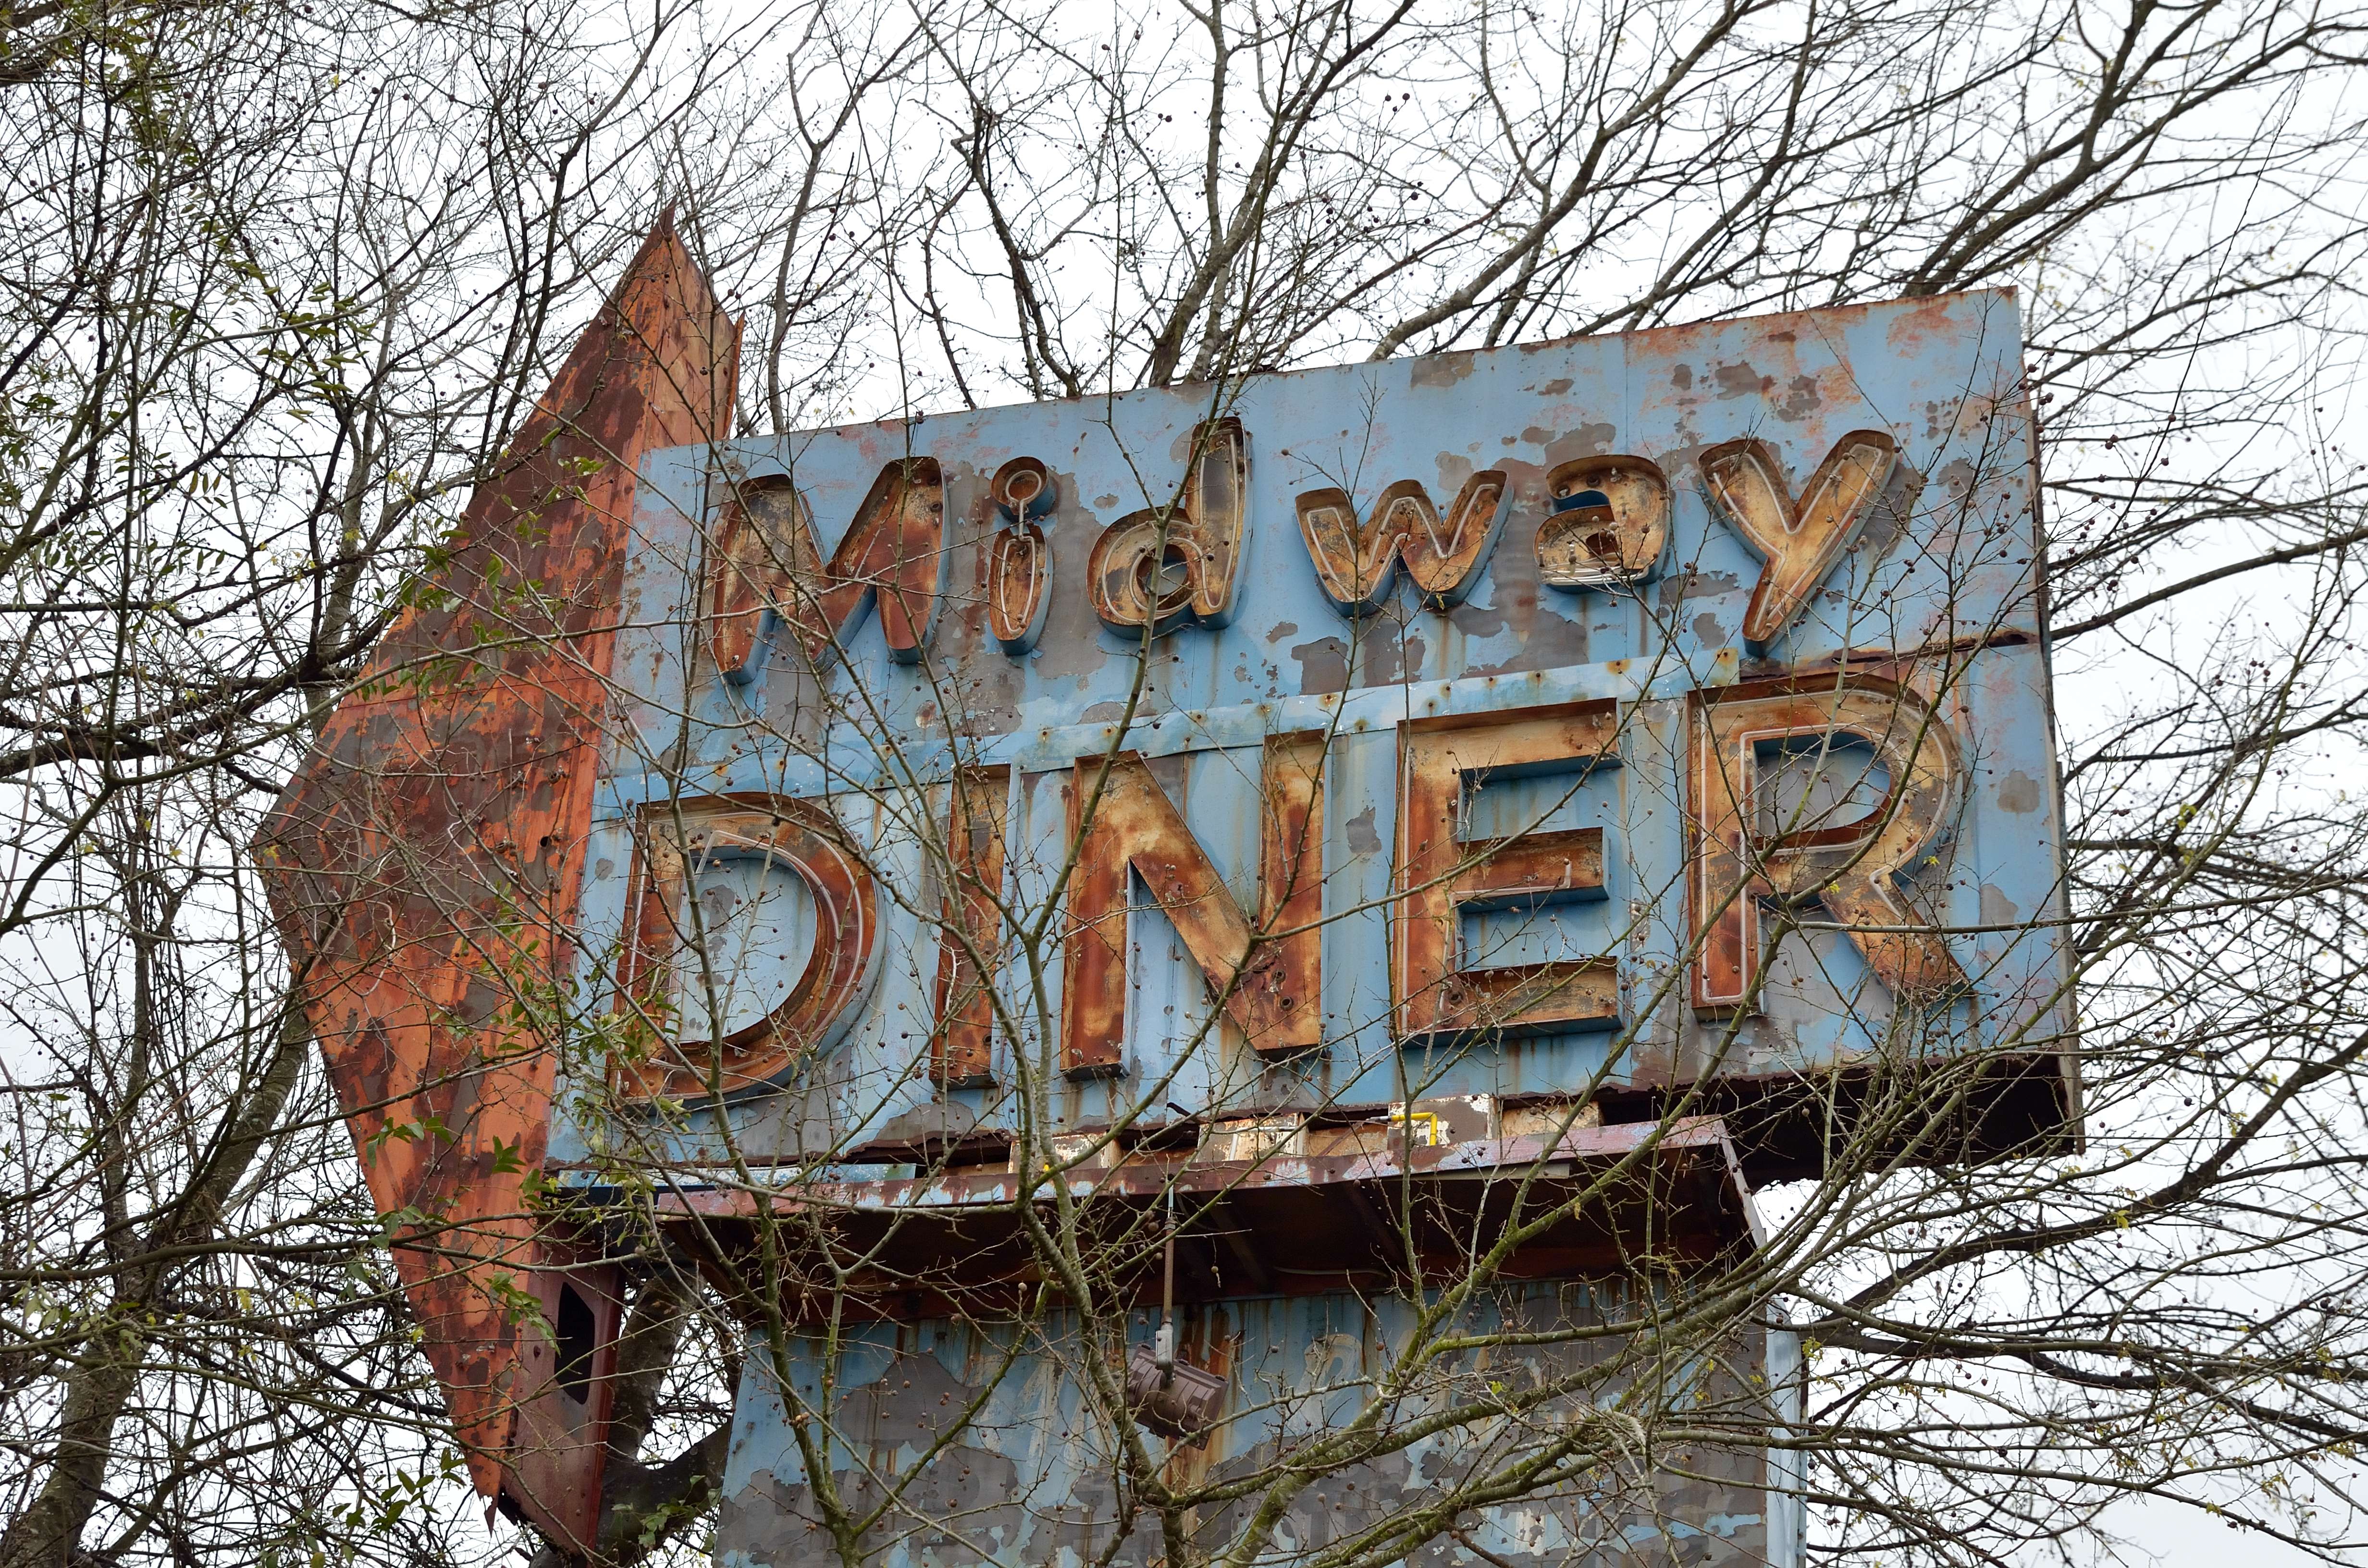 Midway Diner - Marion, South Carolina U.S.A. - March 24, 2013